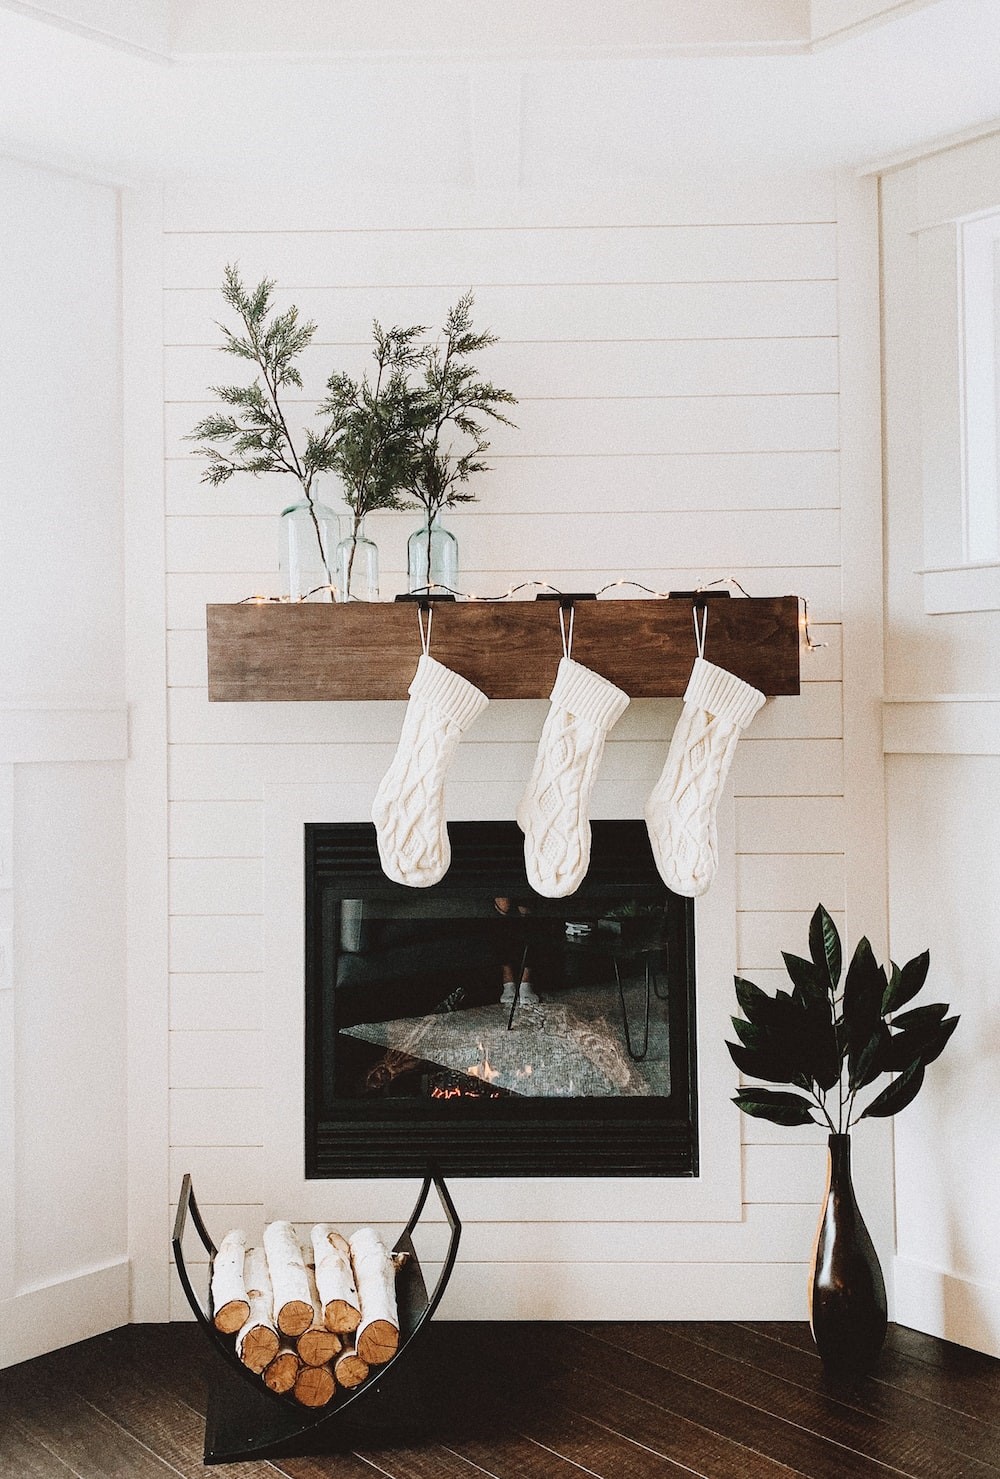 Fireplace decorated with lights and stockings